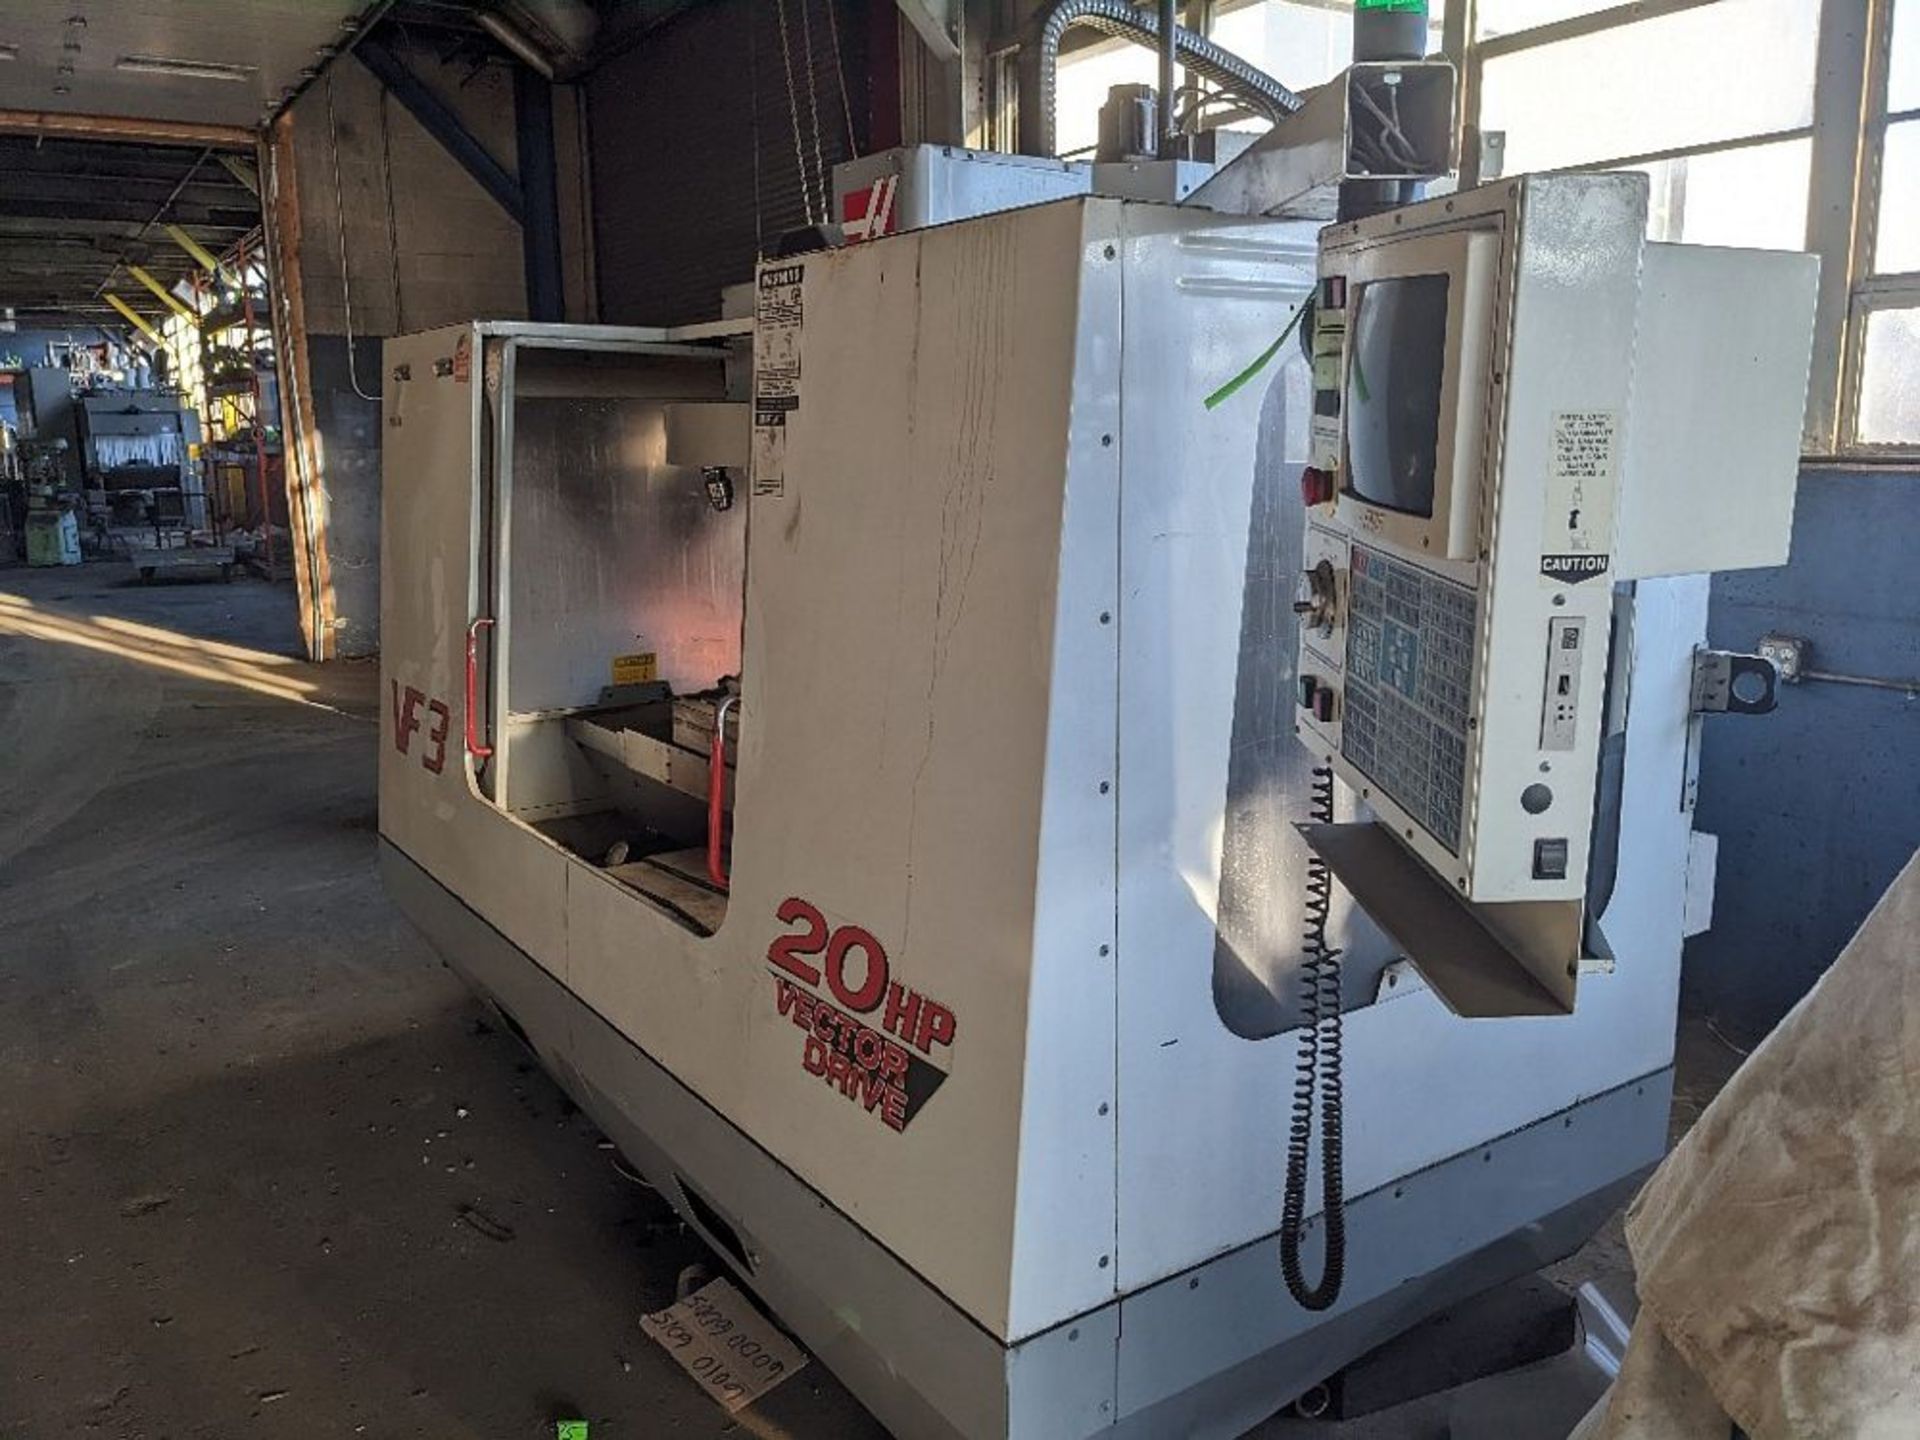 Haas VFS CNC Mill - X Axis Travel: 40" - Y Axis Travel: 20" - Z Axis Travel: 25" - Rapid Rate X - Image 4 of 12